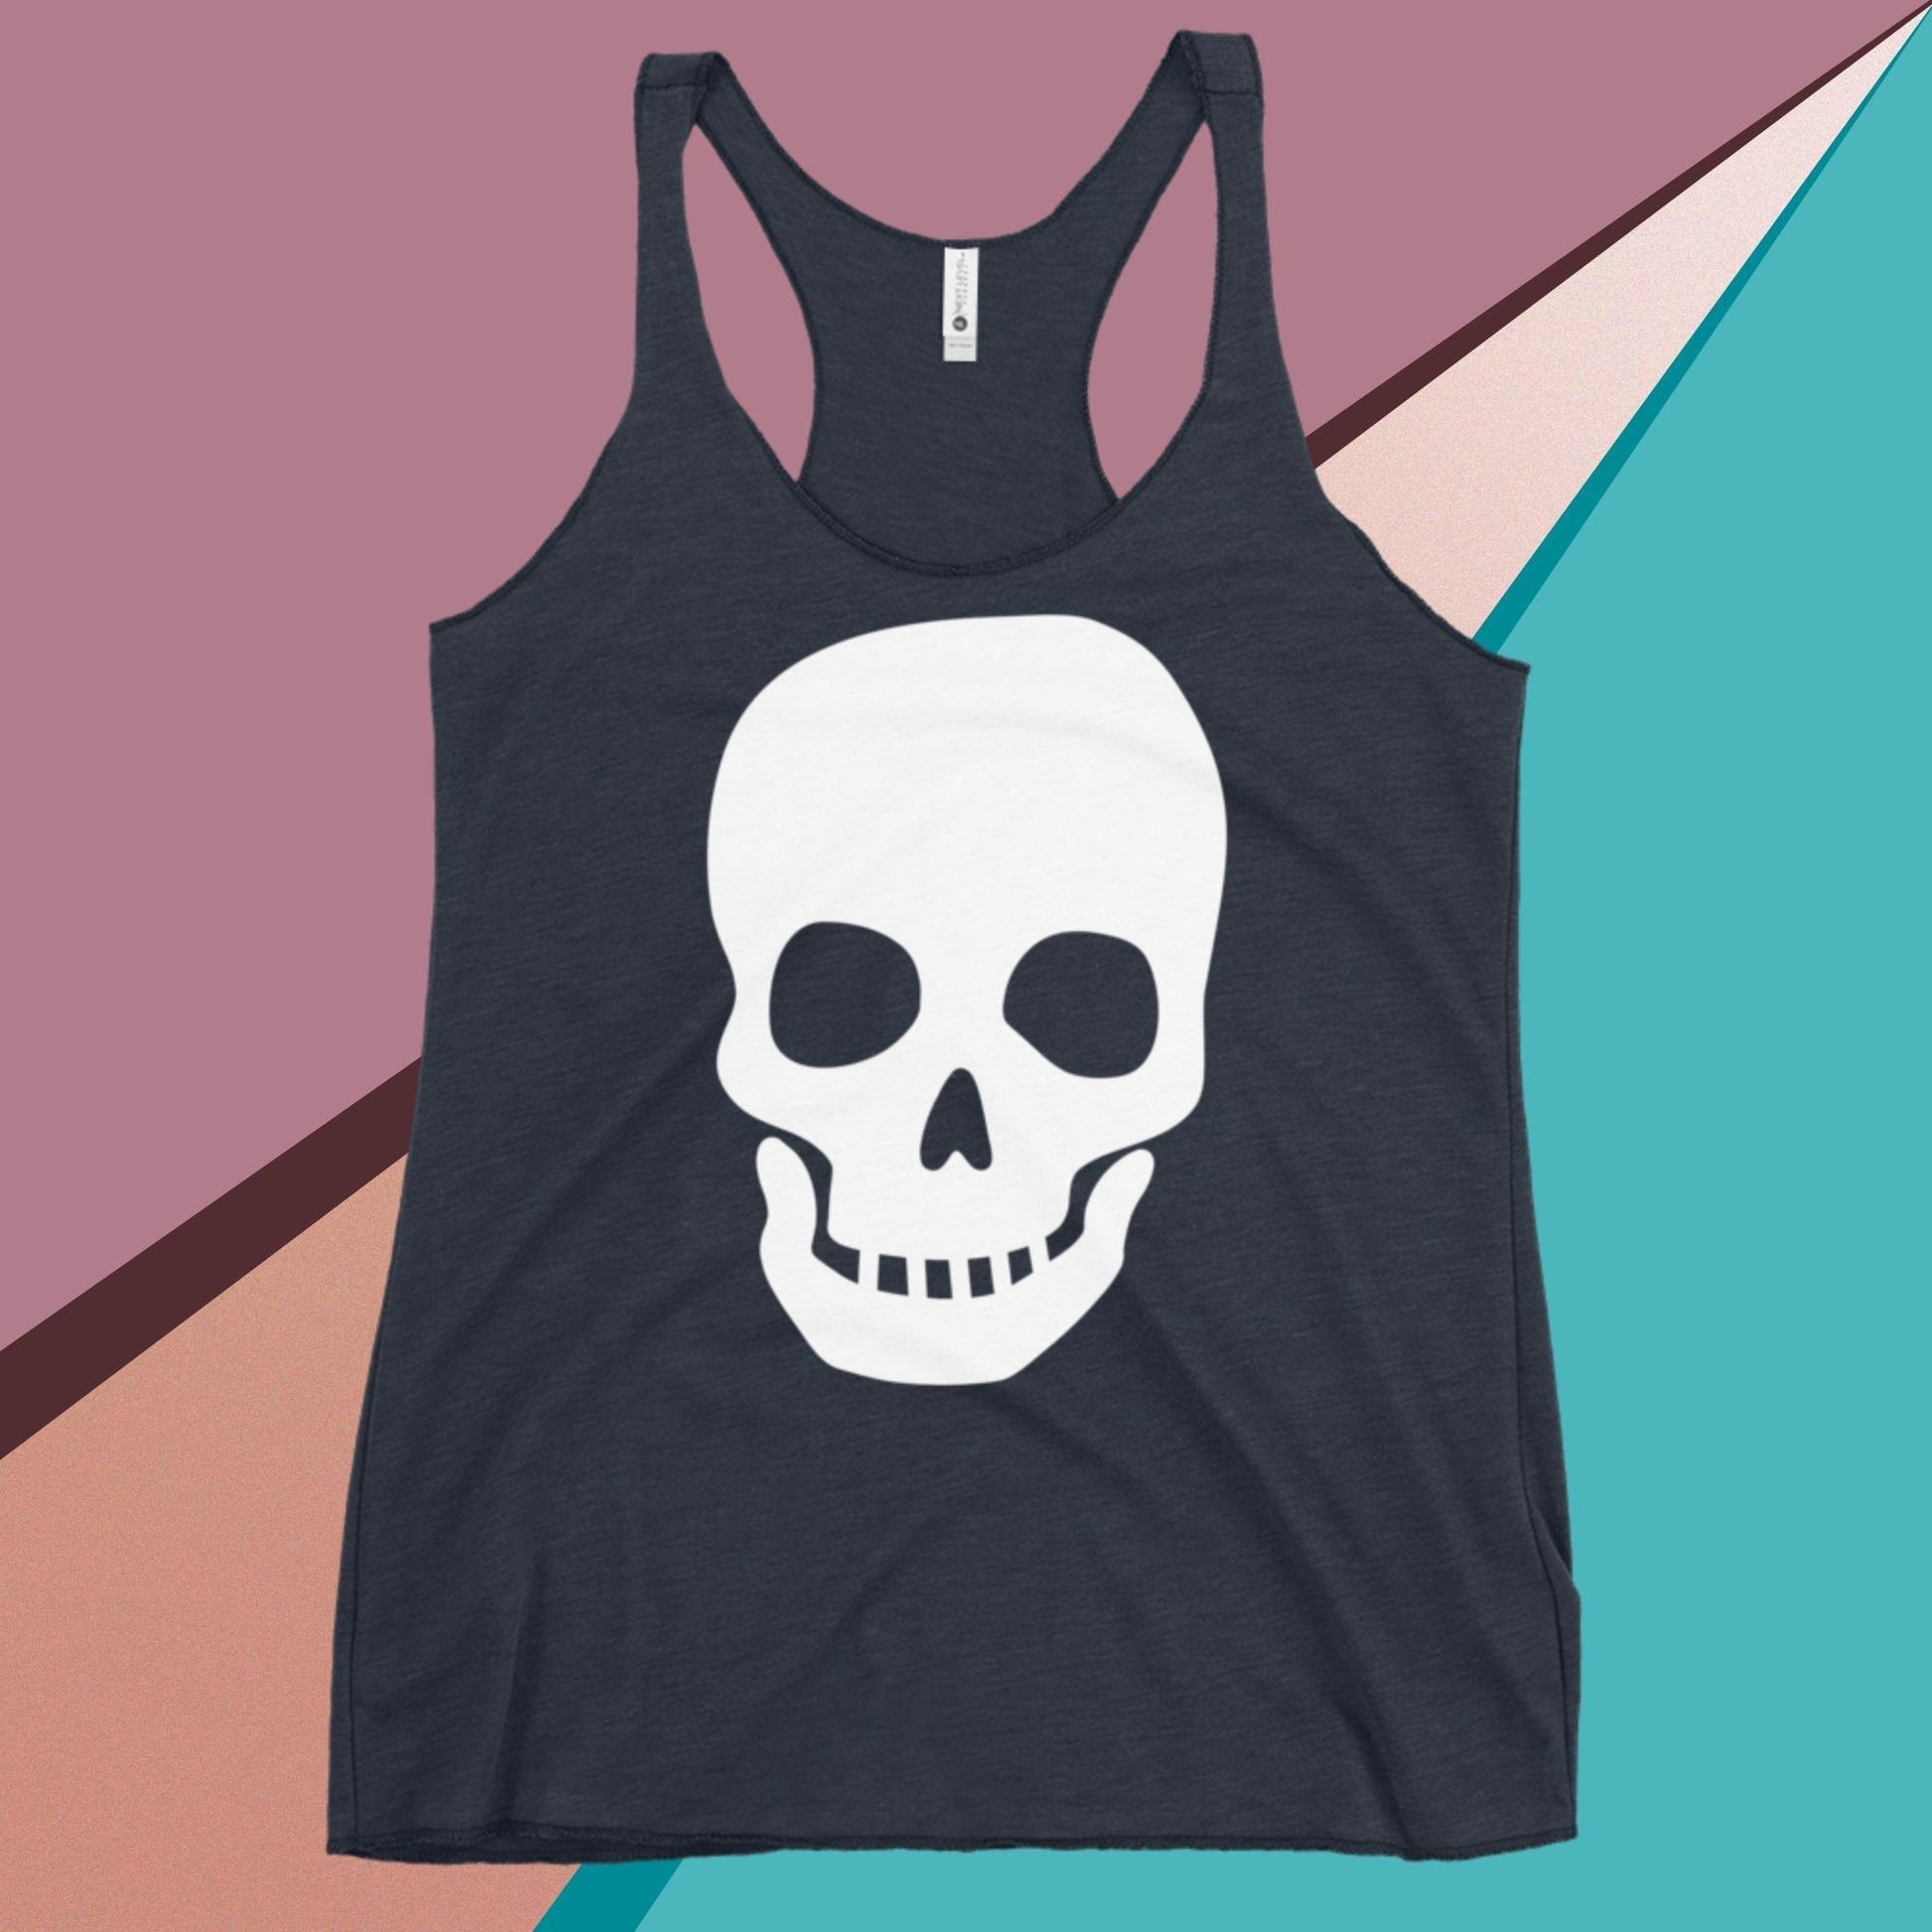 Reveal Your Inner Rebel with our Skull Women's Racerback Tank - Trendy, Edgy, and Unstoppable! - Lizard Vigilante